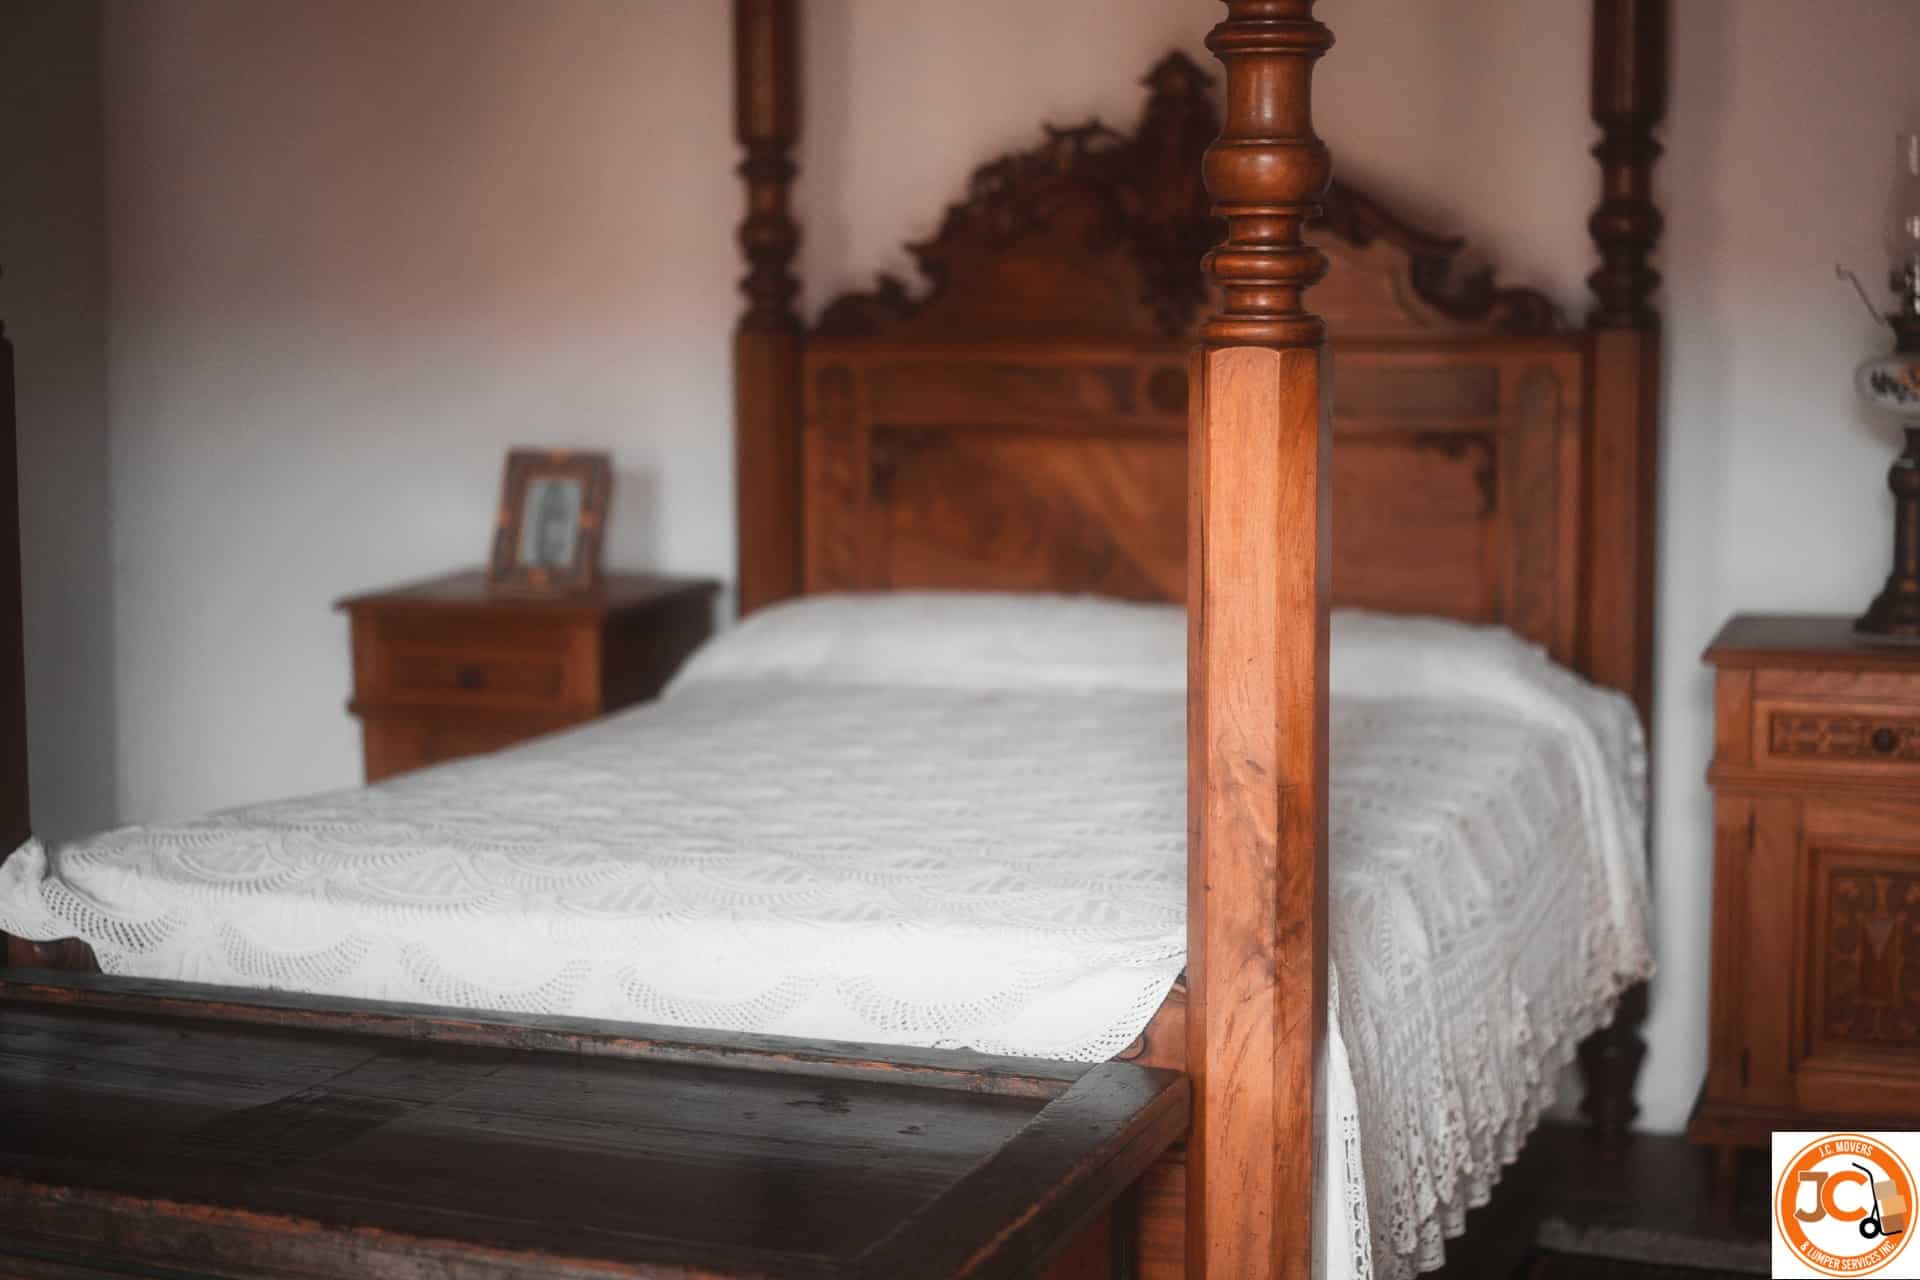 Palatine IL Mattress Bed Moving Services